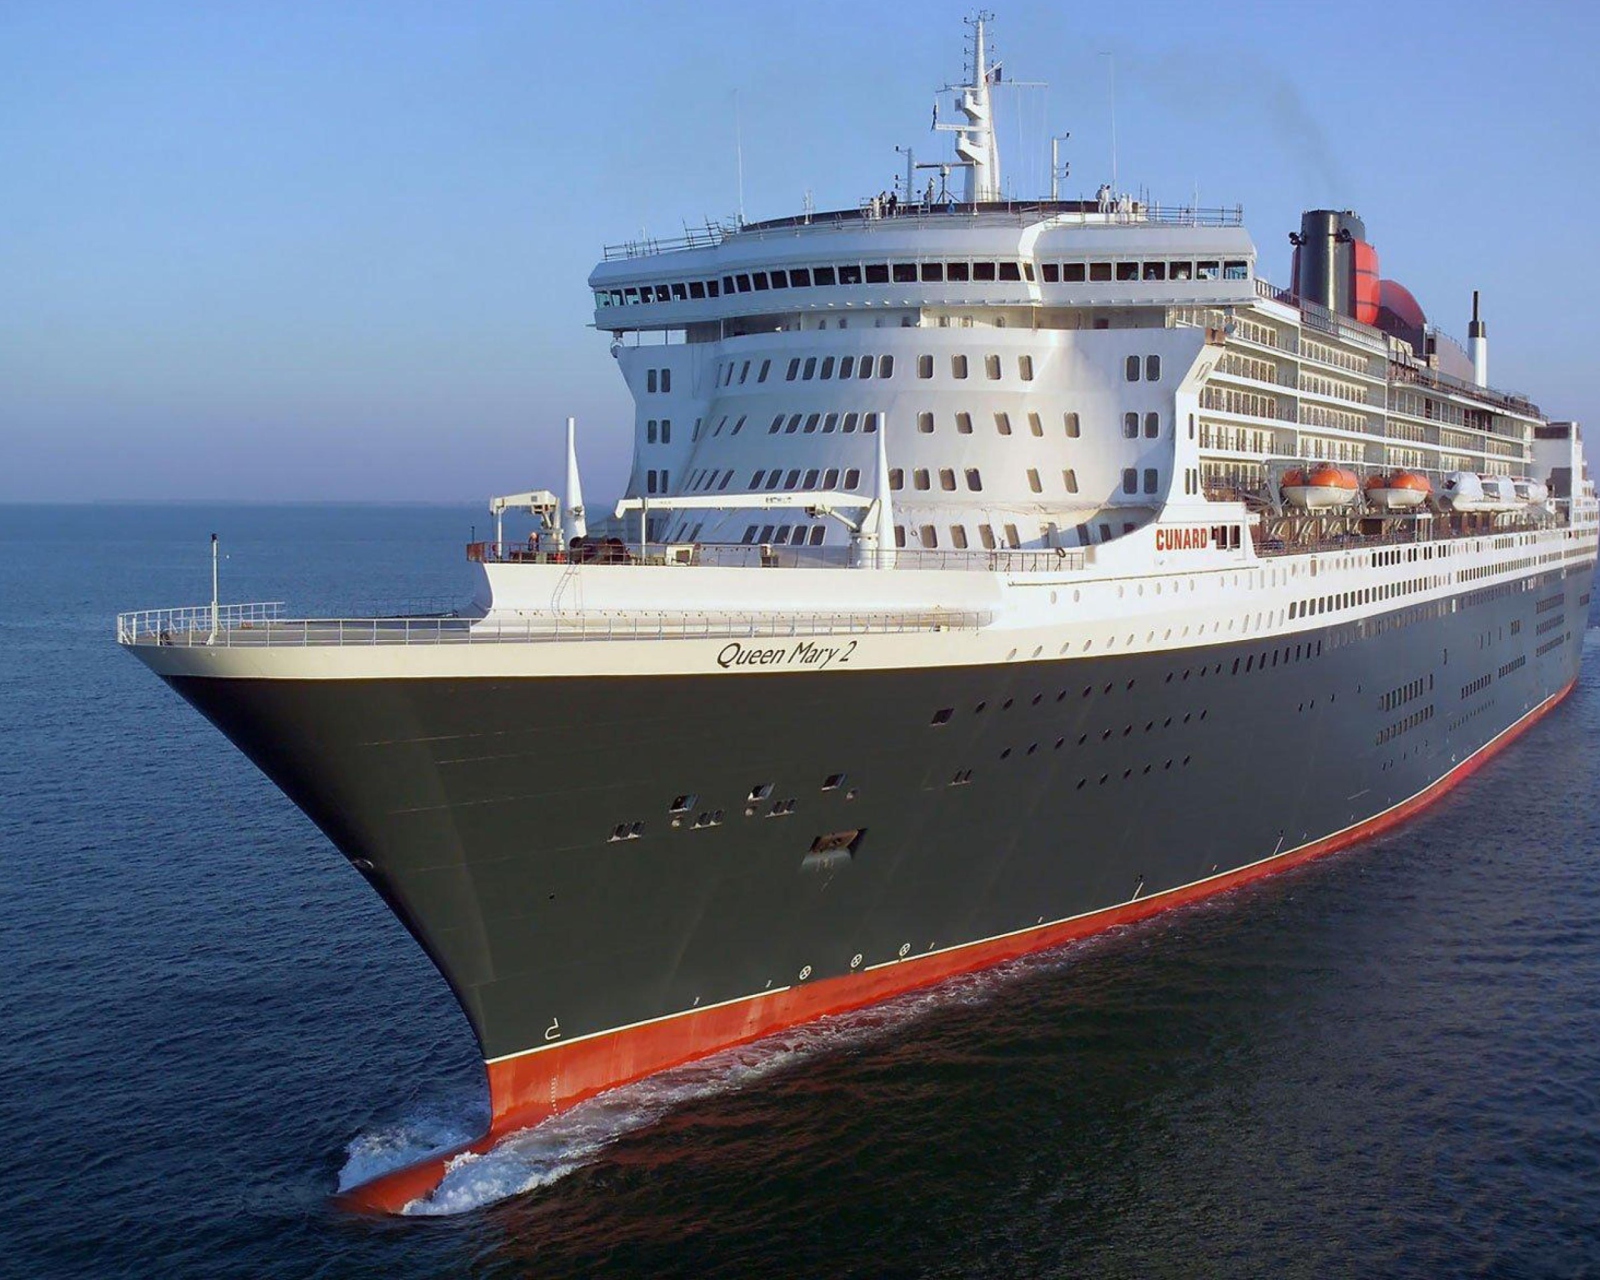 Queen Mary 2 - Flagship wallpaper 1600x1280